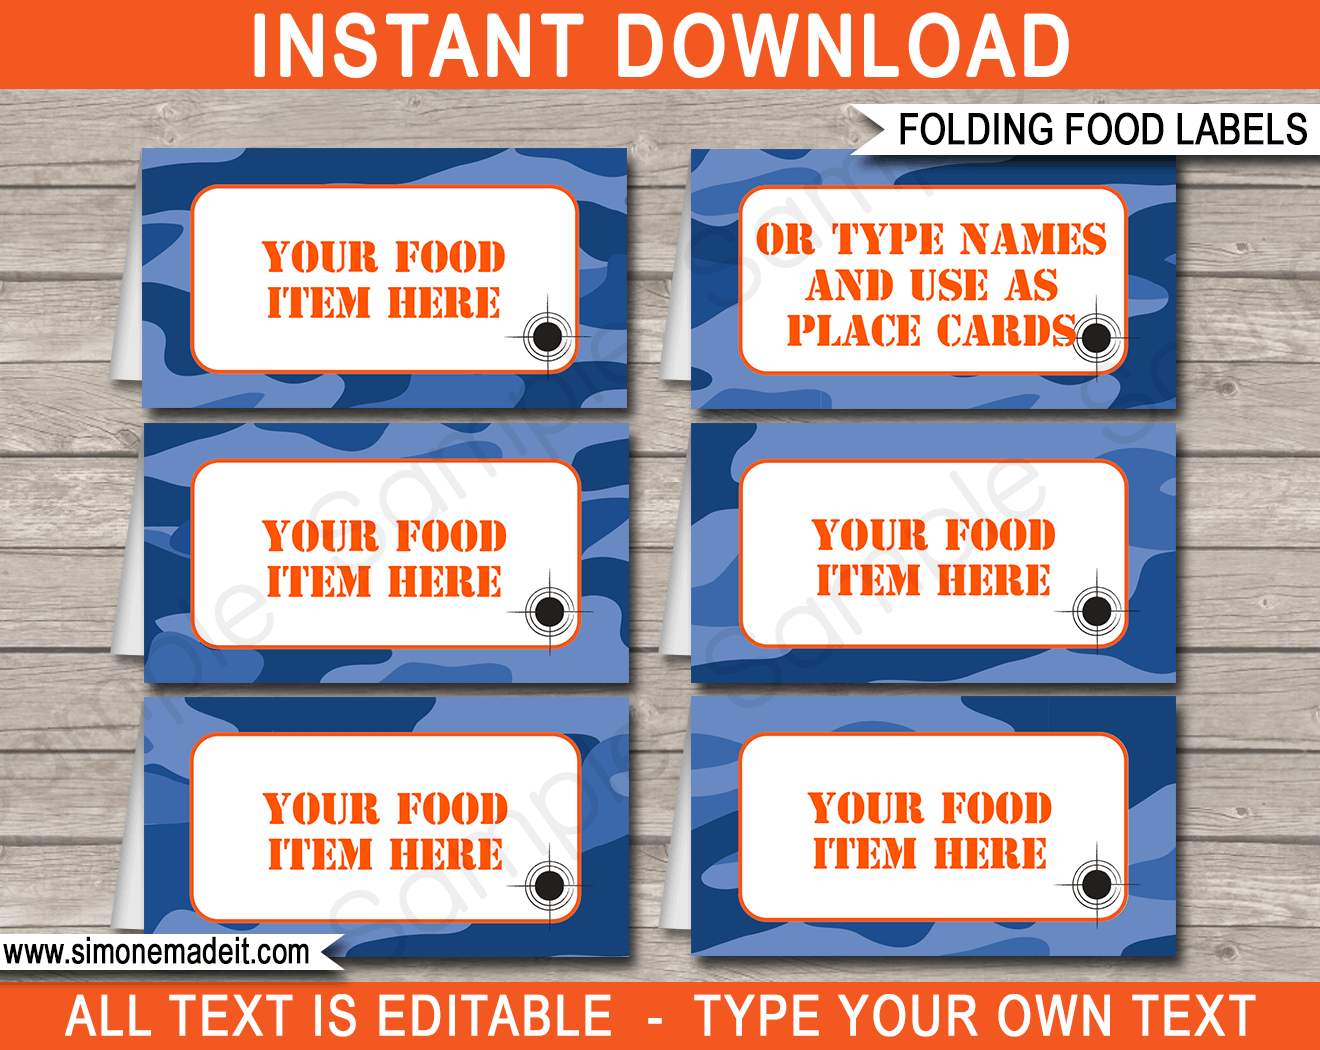 Nerf Food Labels | Food Buffet Cards | Place Cards |Printable Party Decorations | DIY Editable template | $3.00 Instant Download via simonemadeit.com